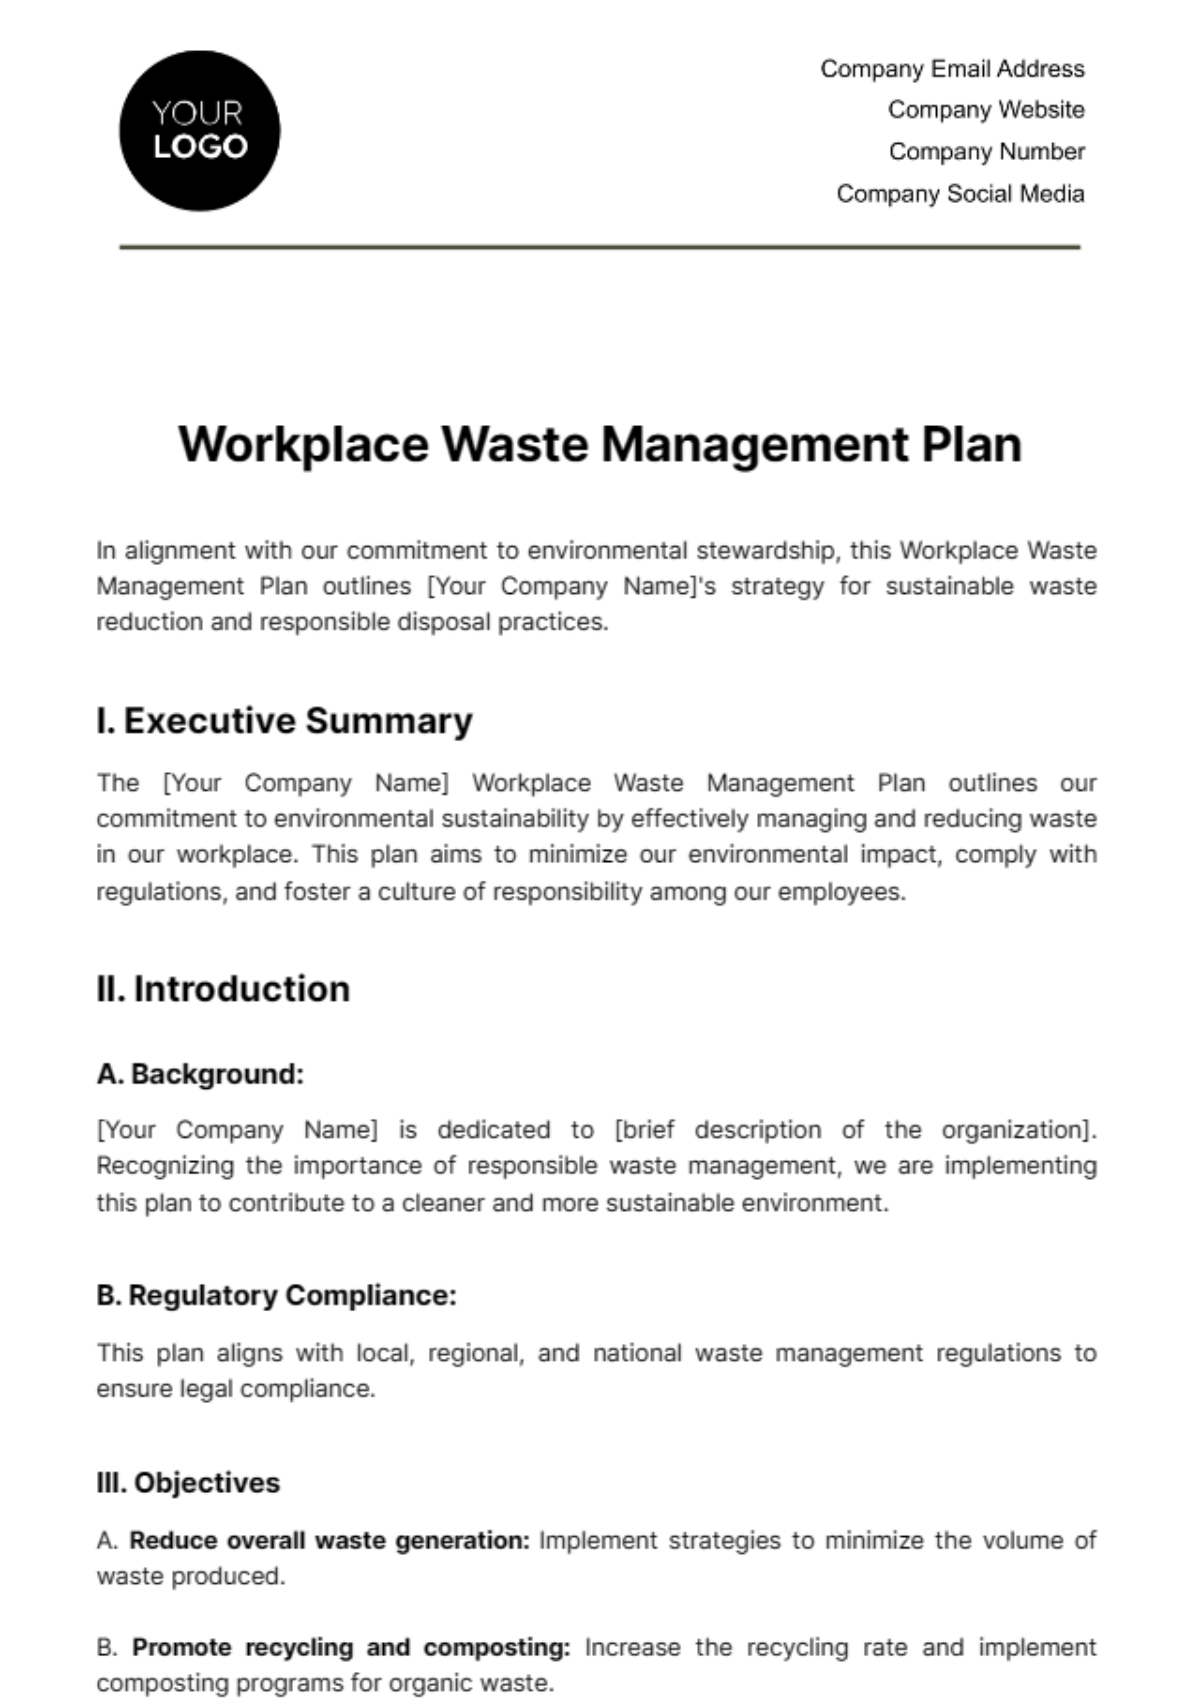 Workplace Waste Management Plan Template